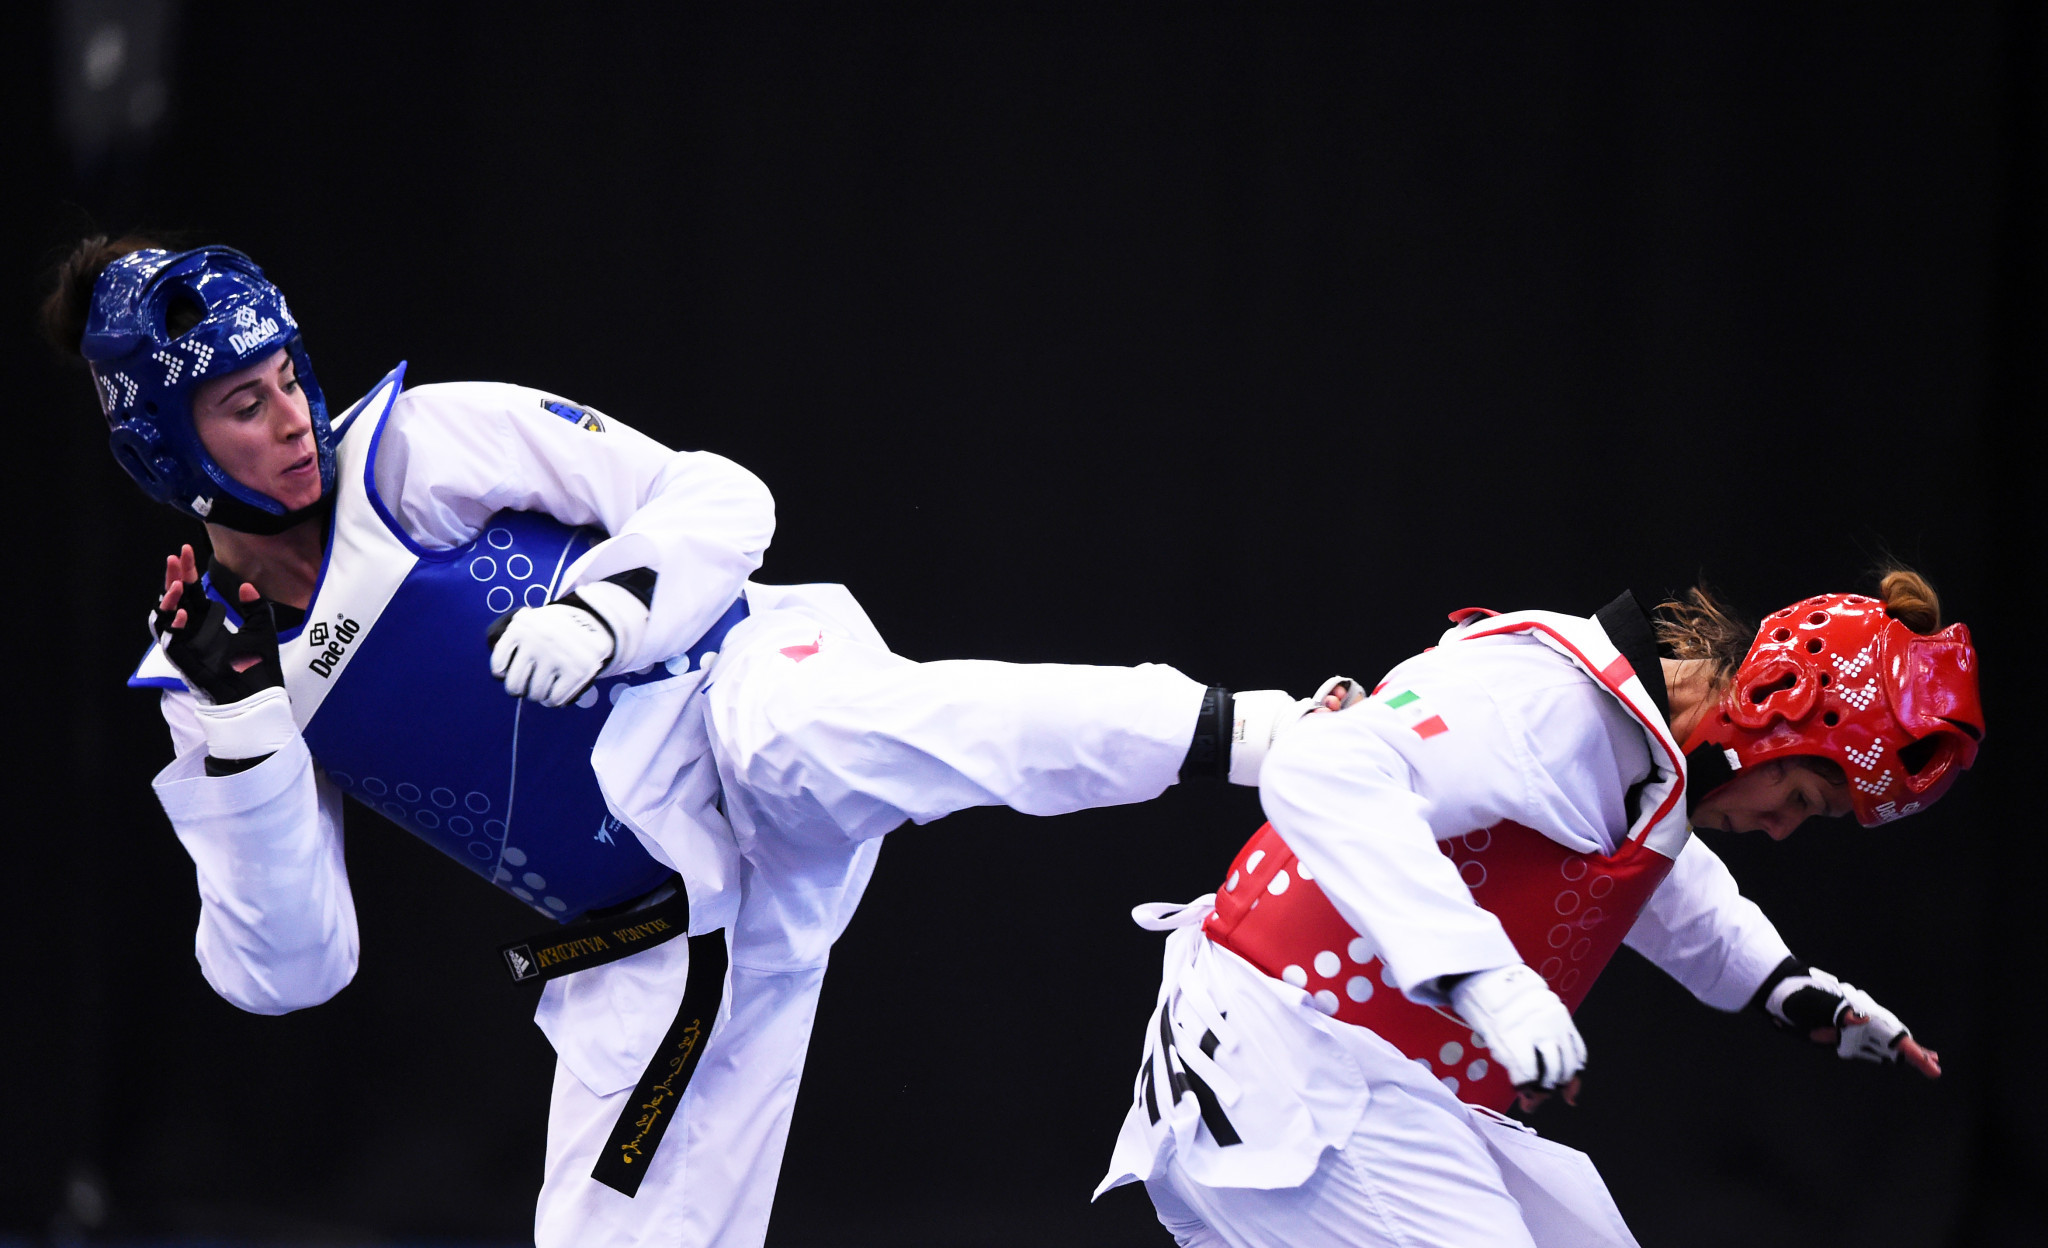 Walkden triumphs at World Taekwondo President's Cup for Europe region on successful day for hosts Turkey